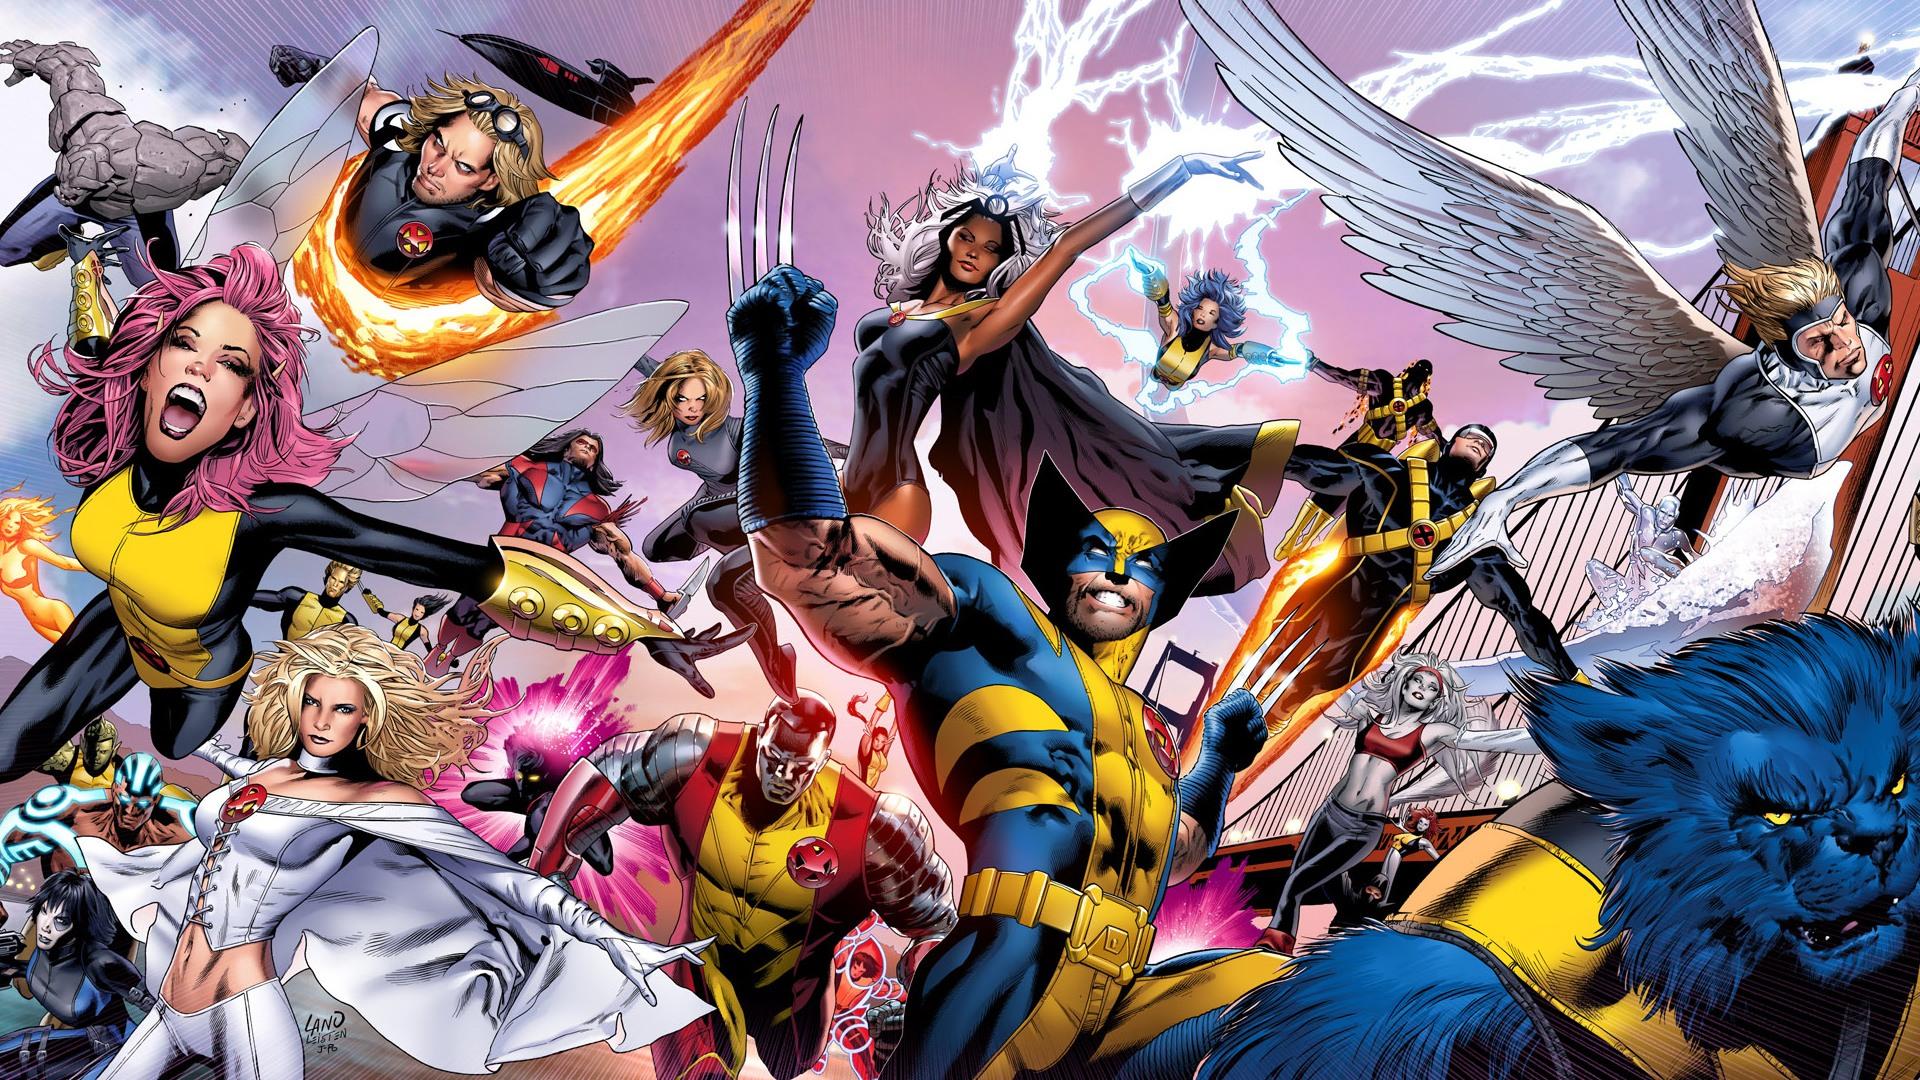 All the X-Men Superhero Logo - The Big NO on Spandex: Why Can't Our Movie Heroes Look Like